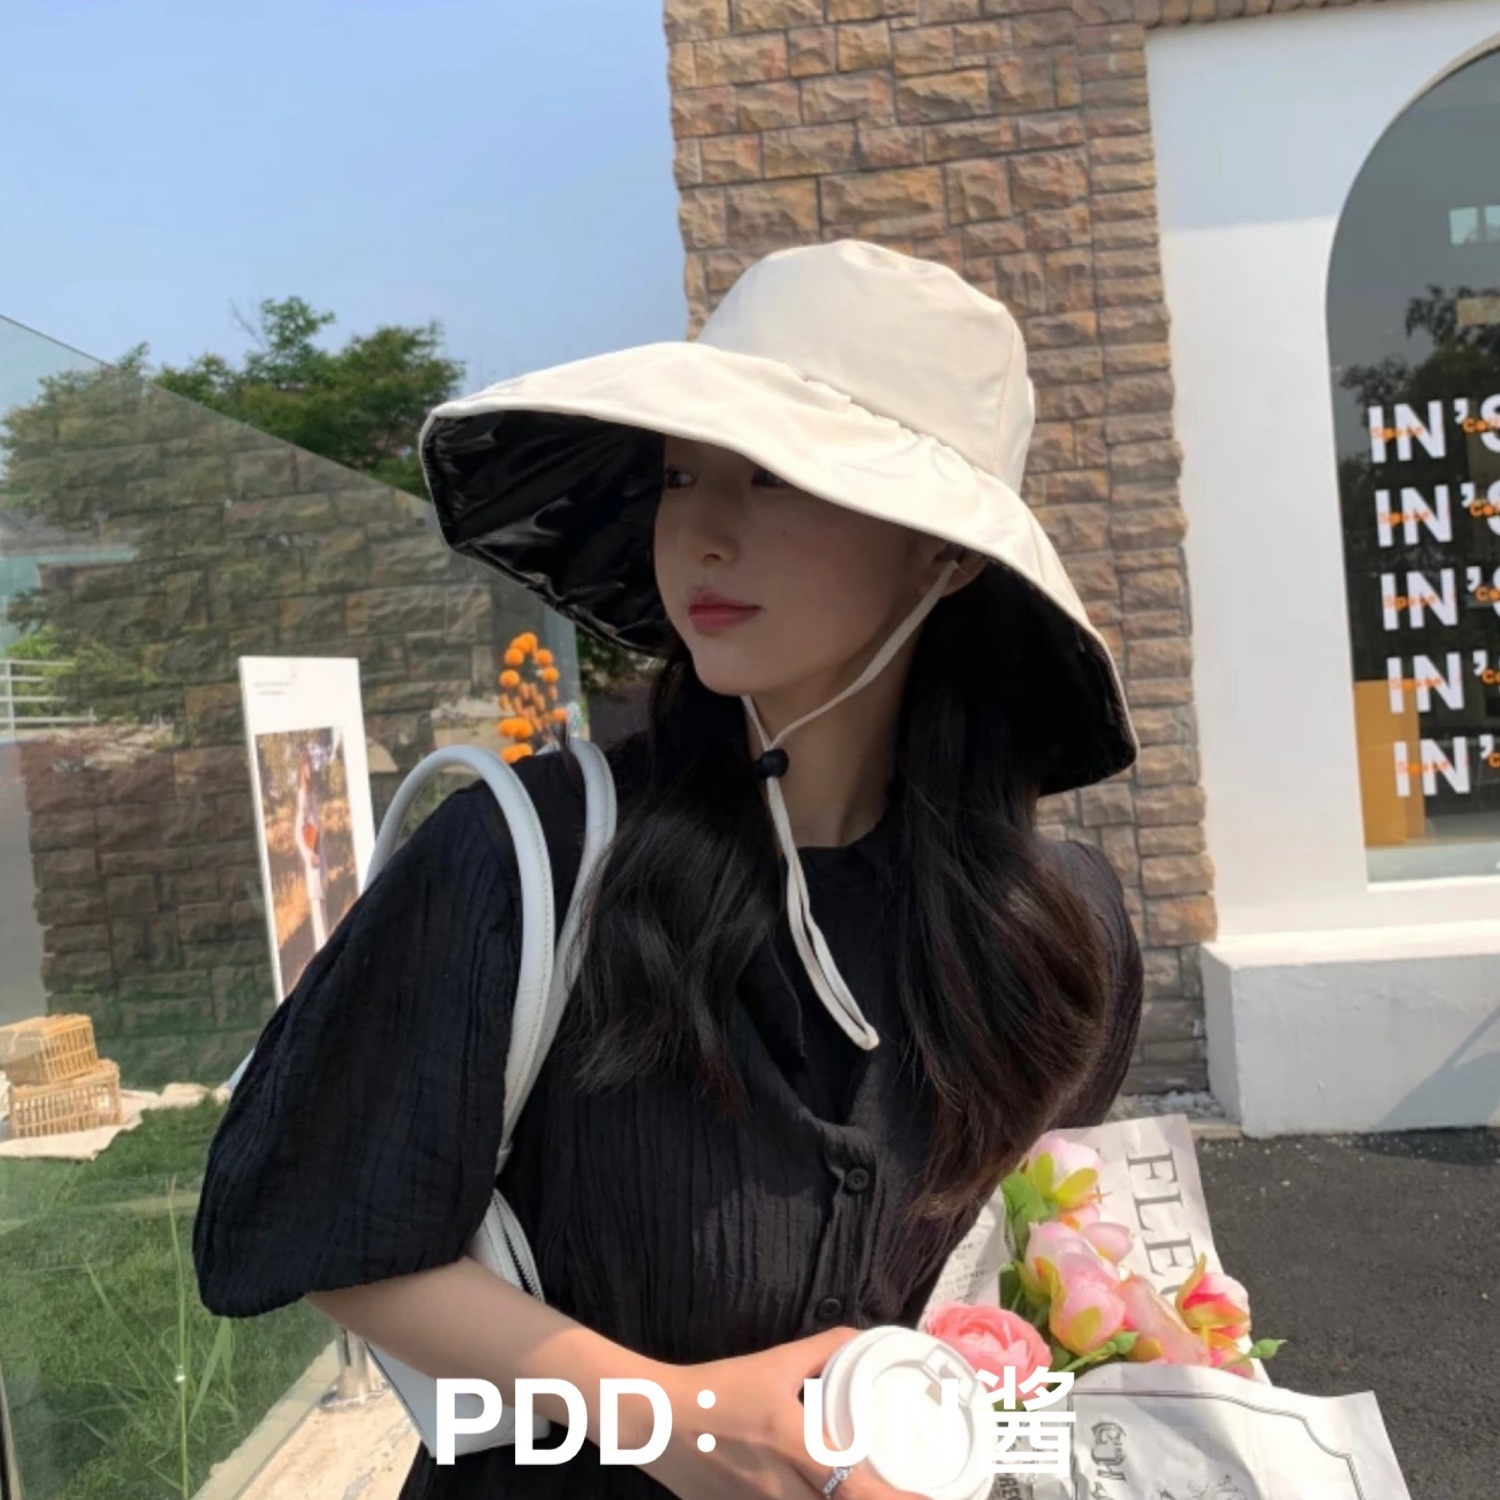 Fisherman hat women's new all-match spring and summer fashion foreign style sunscreen ultraviolet rays big brim cover face sun hat